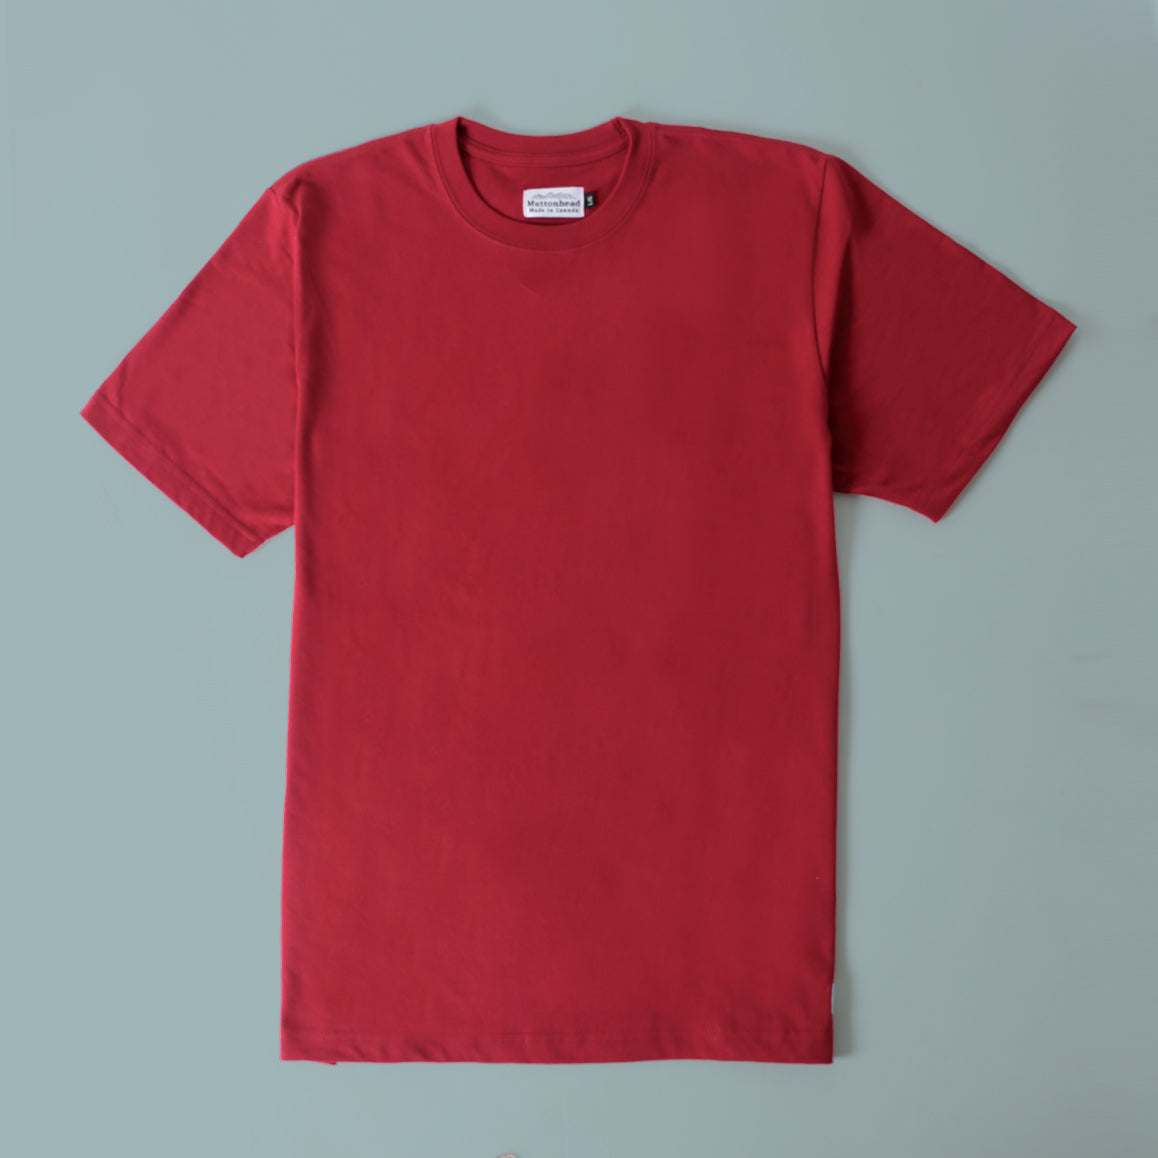 Heavy Weight Tee - Red